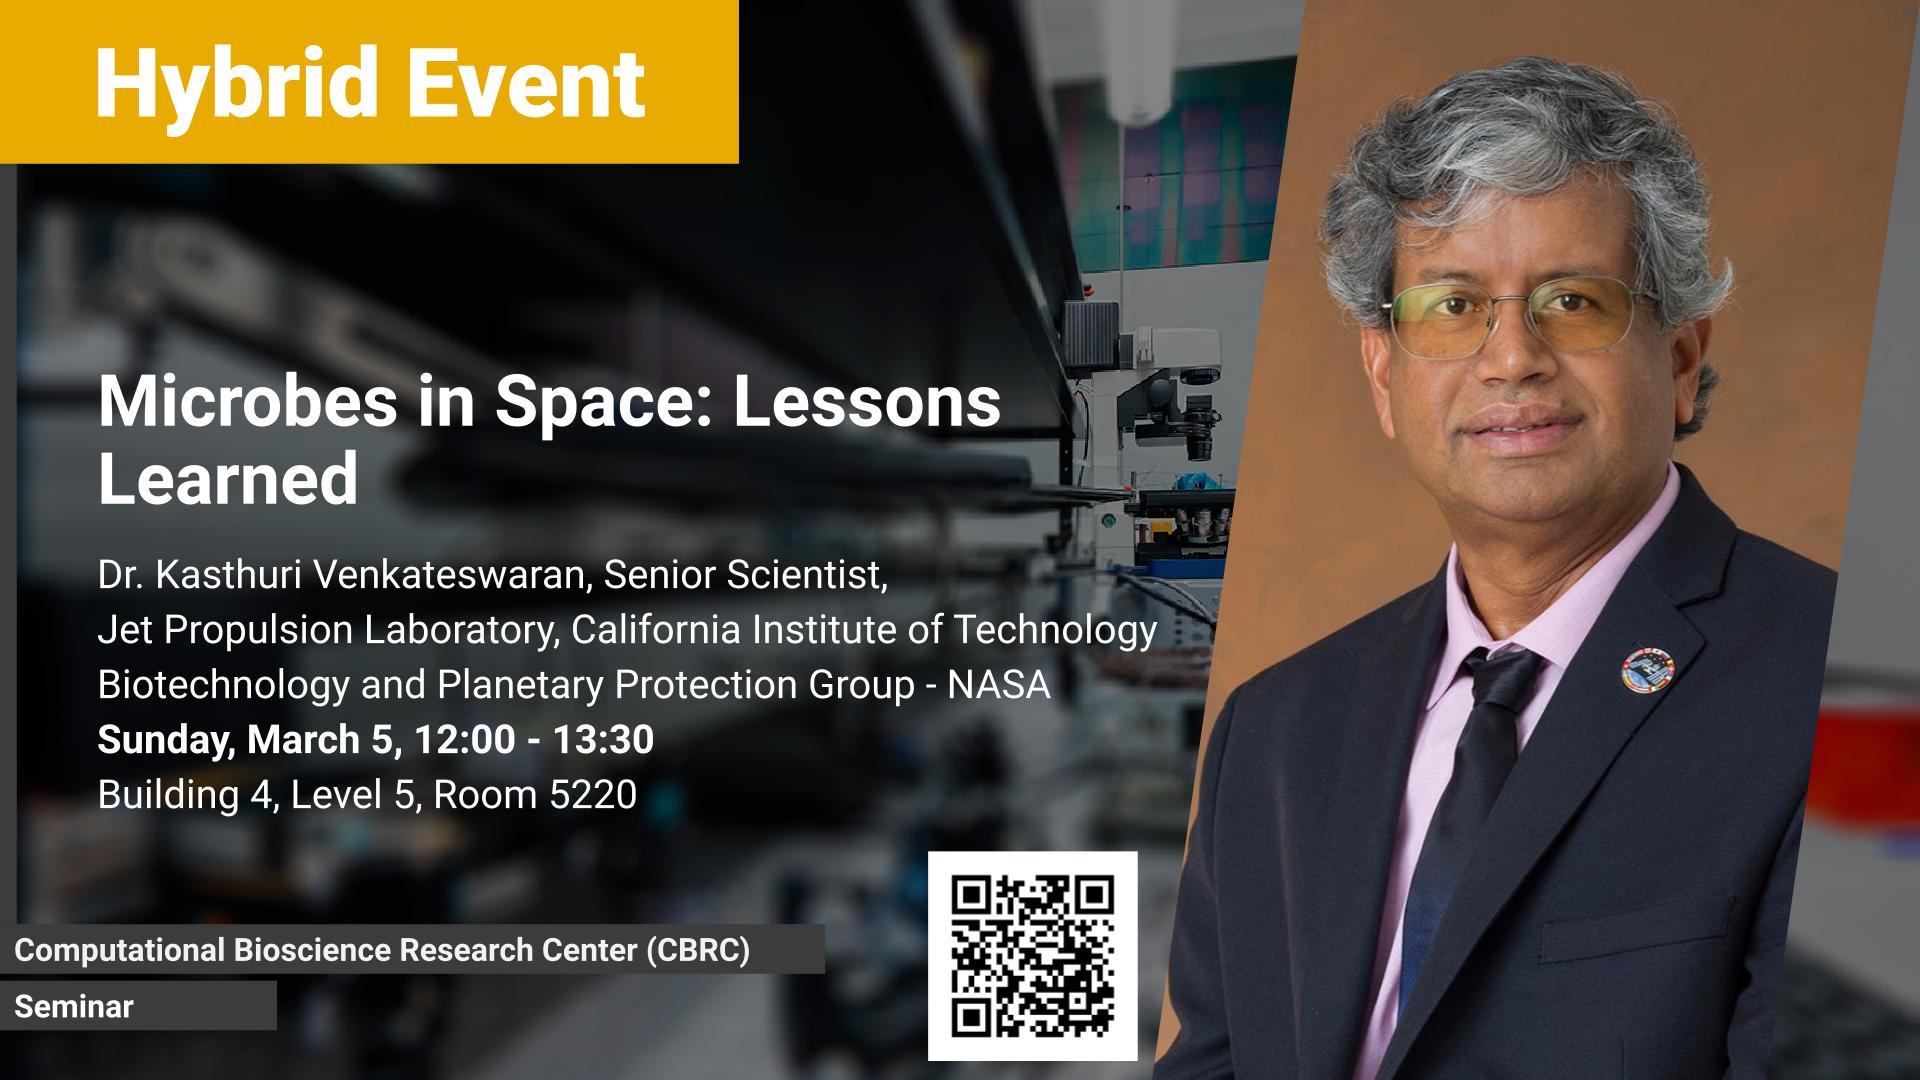 Microbes in Space Lessons Learned by Dr. Kasthuri Venkateswaran